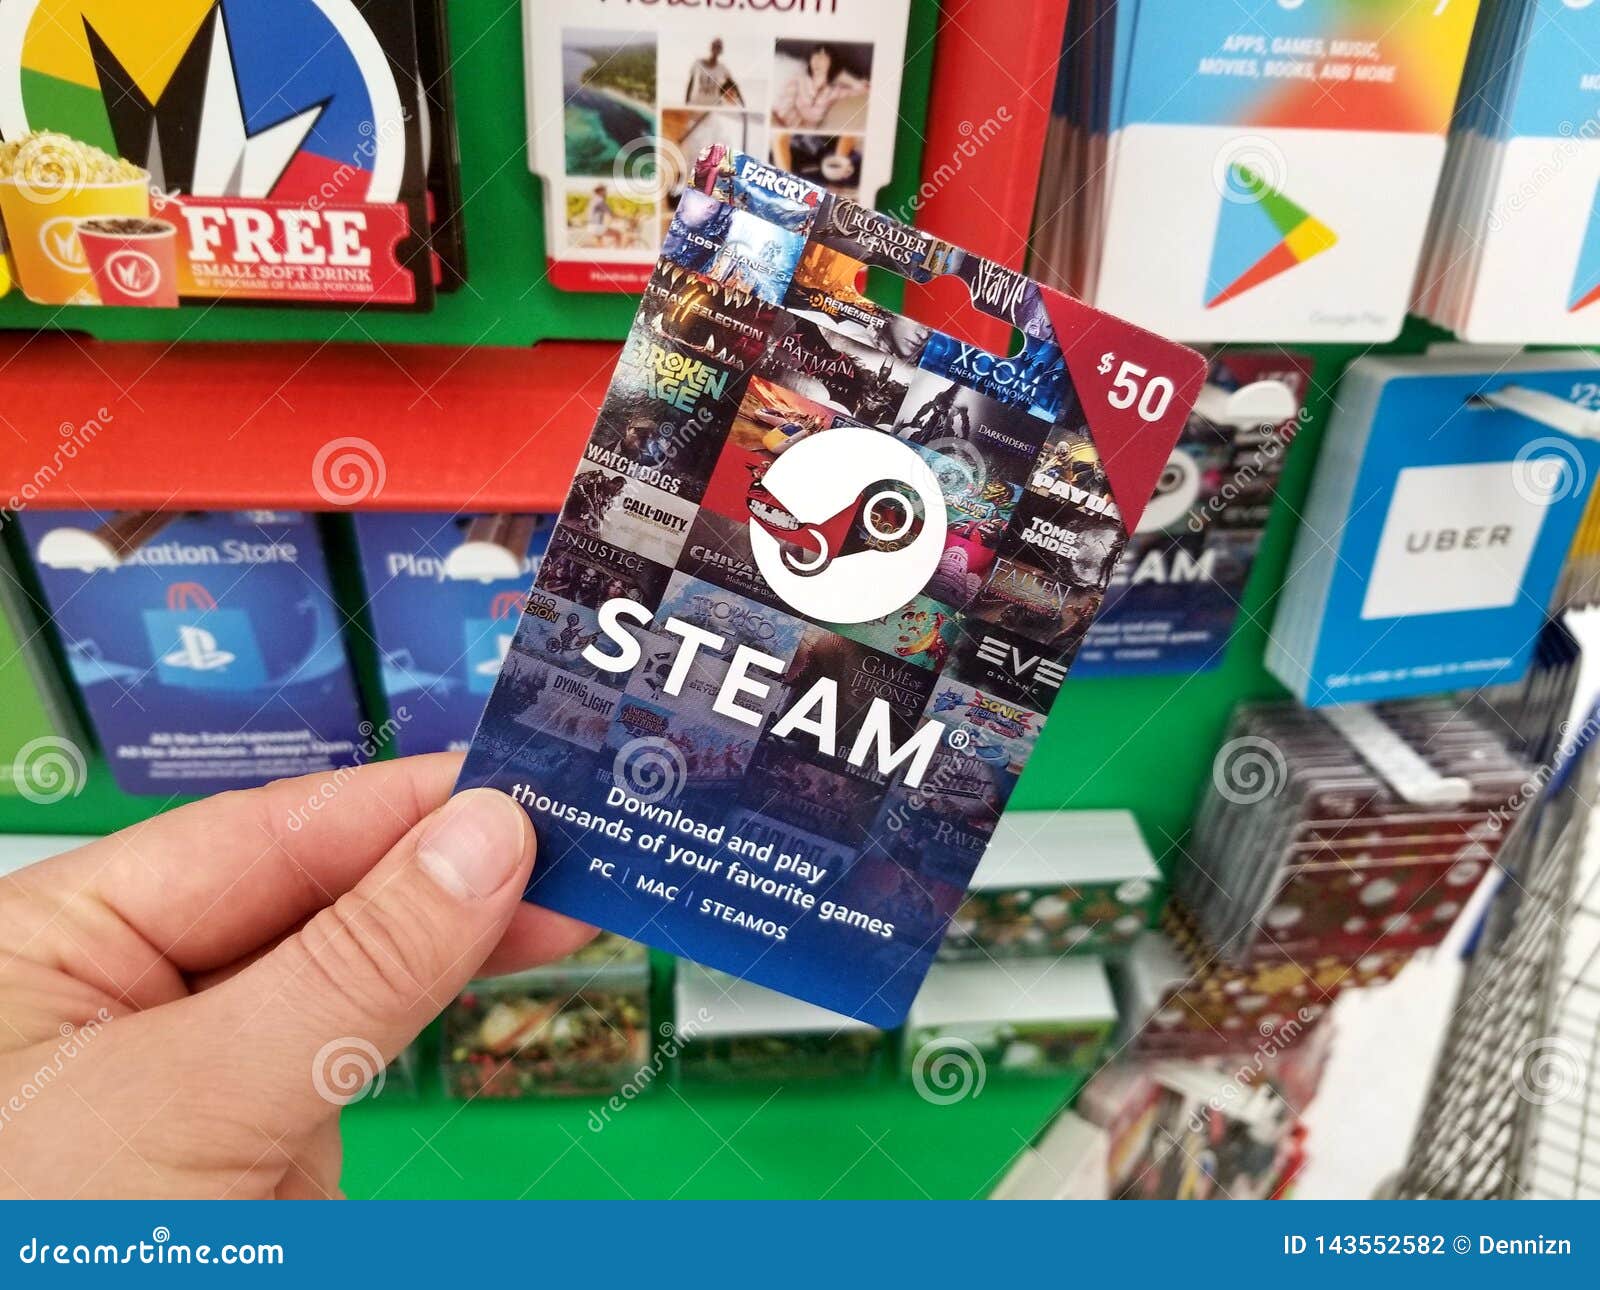 PC Game Cards, Steam Gift Cards